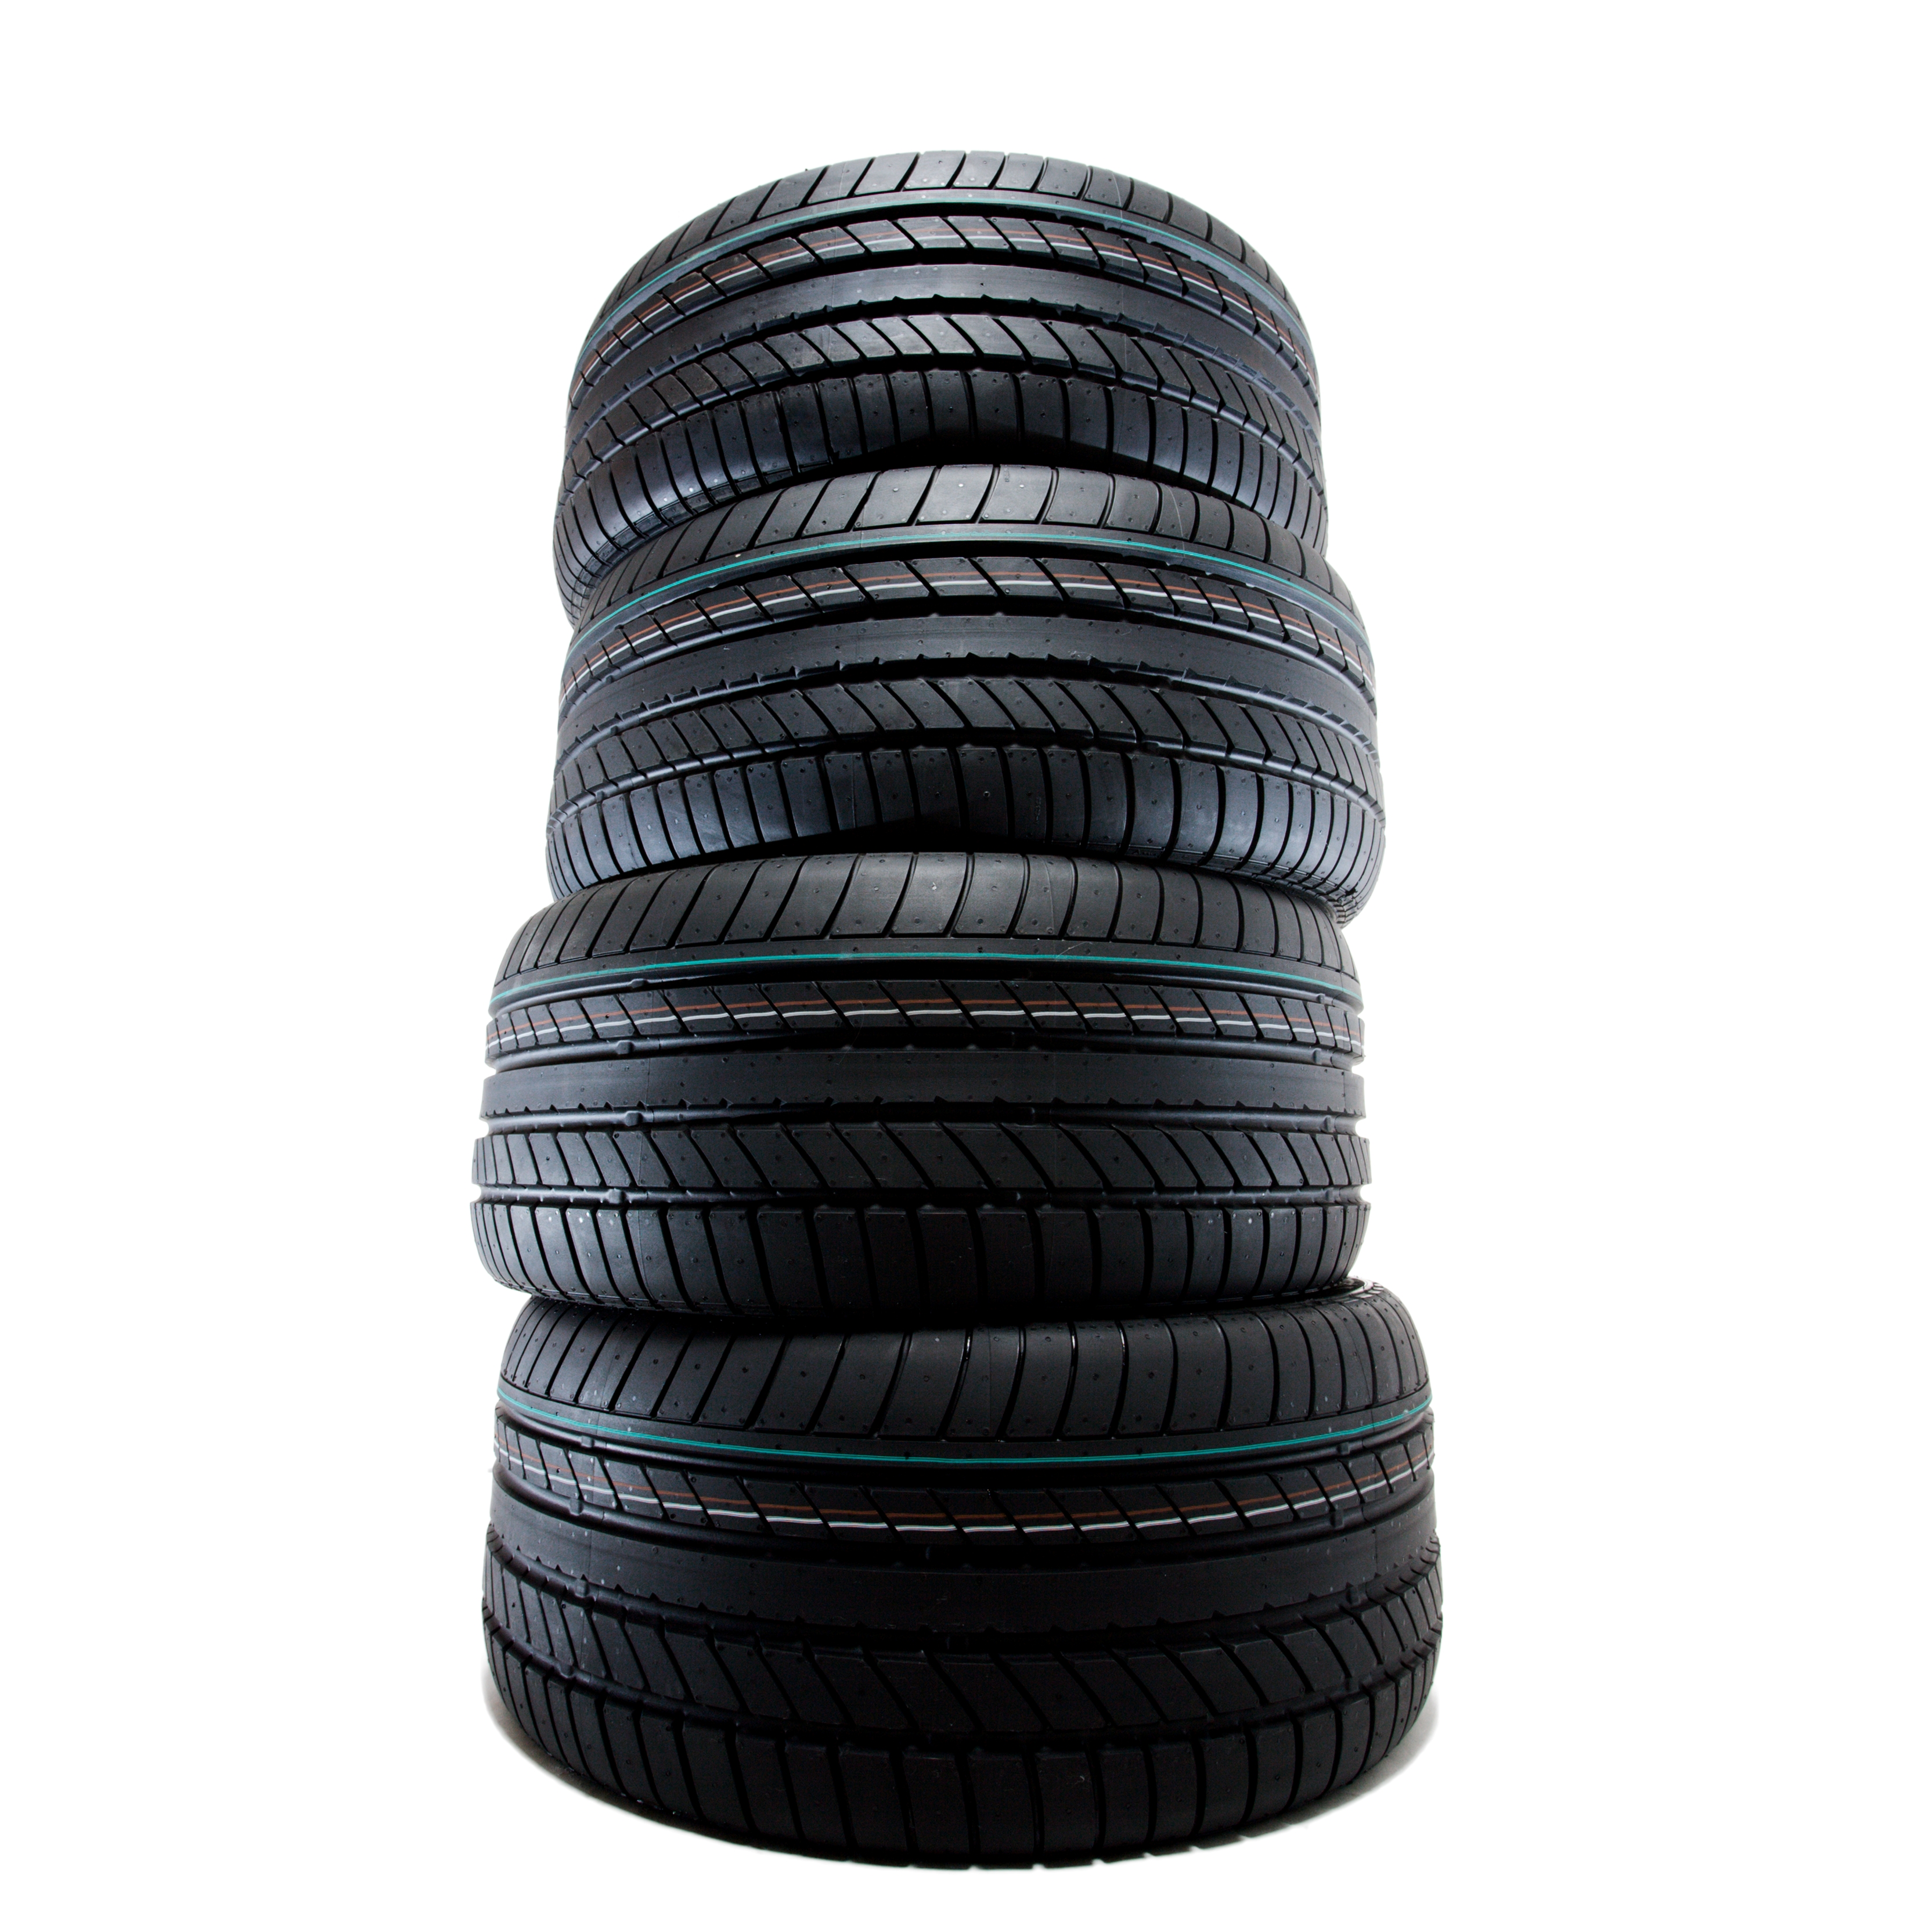 Stack of tires photo